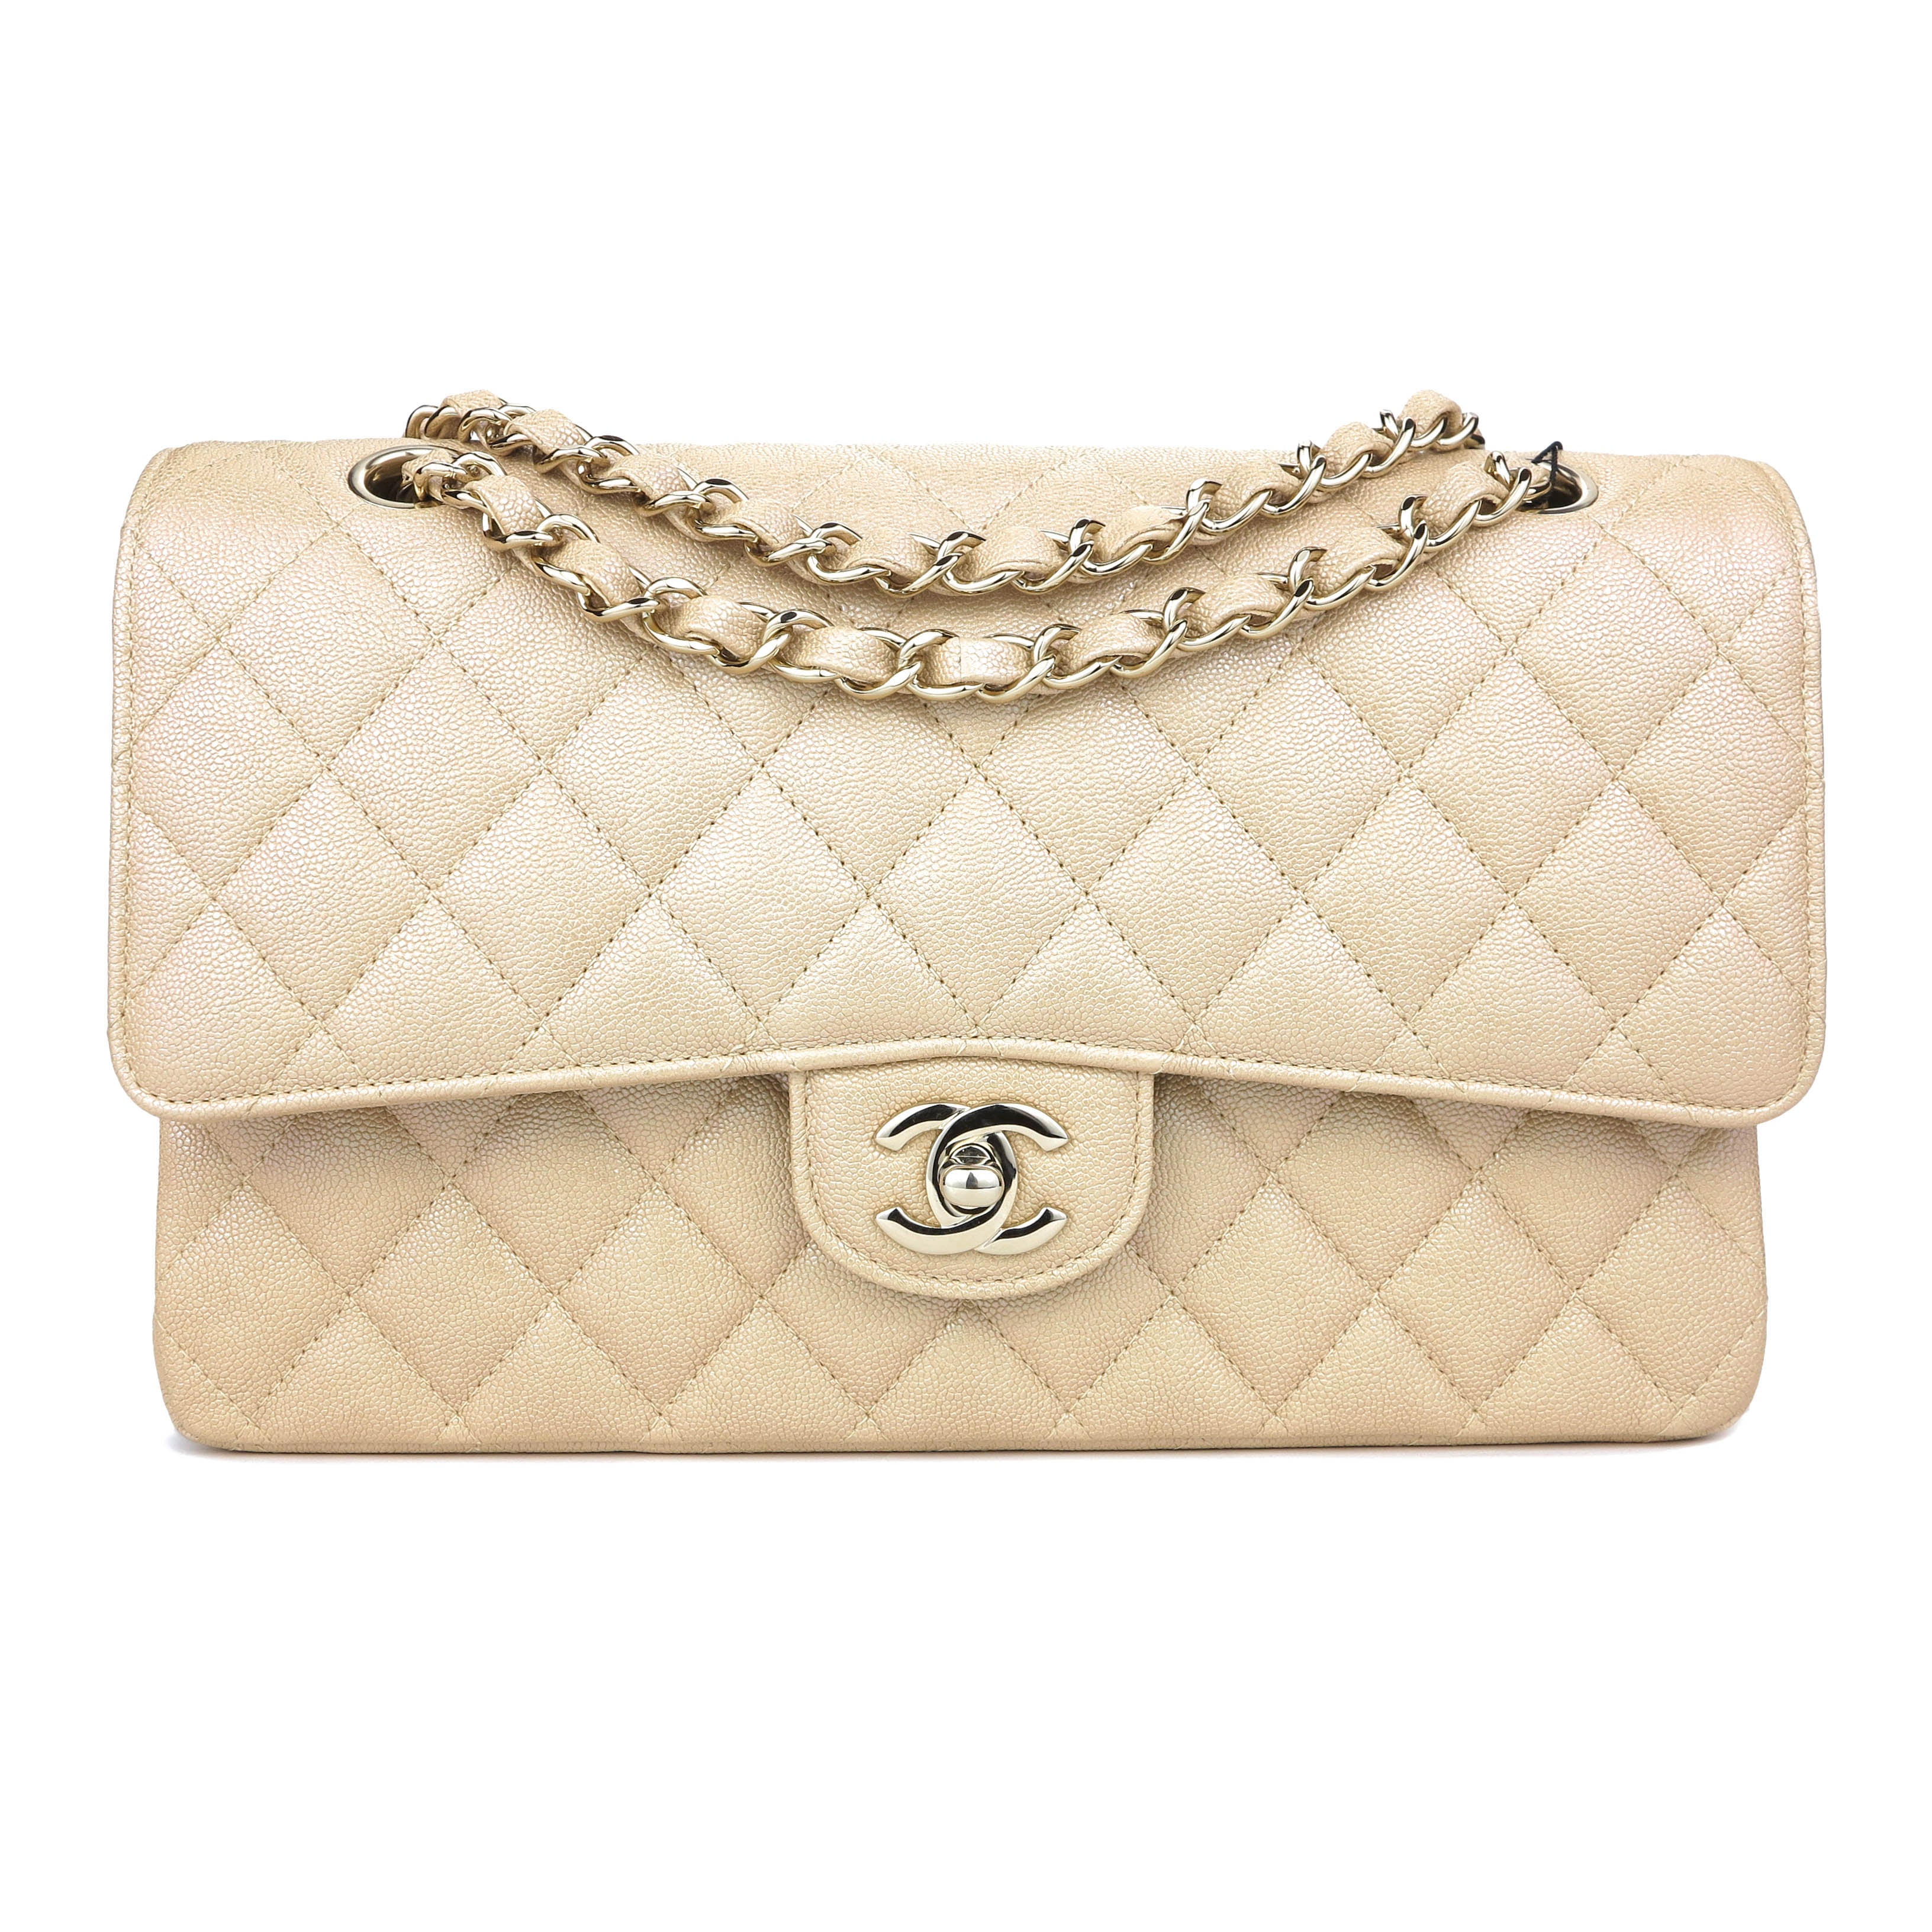 Shop authentic new, pre-owned, vintage CHANEL handbags - Timeless Luxuries  - Page 2